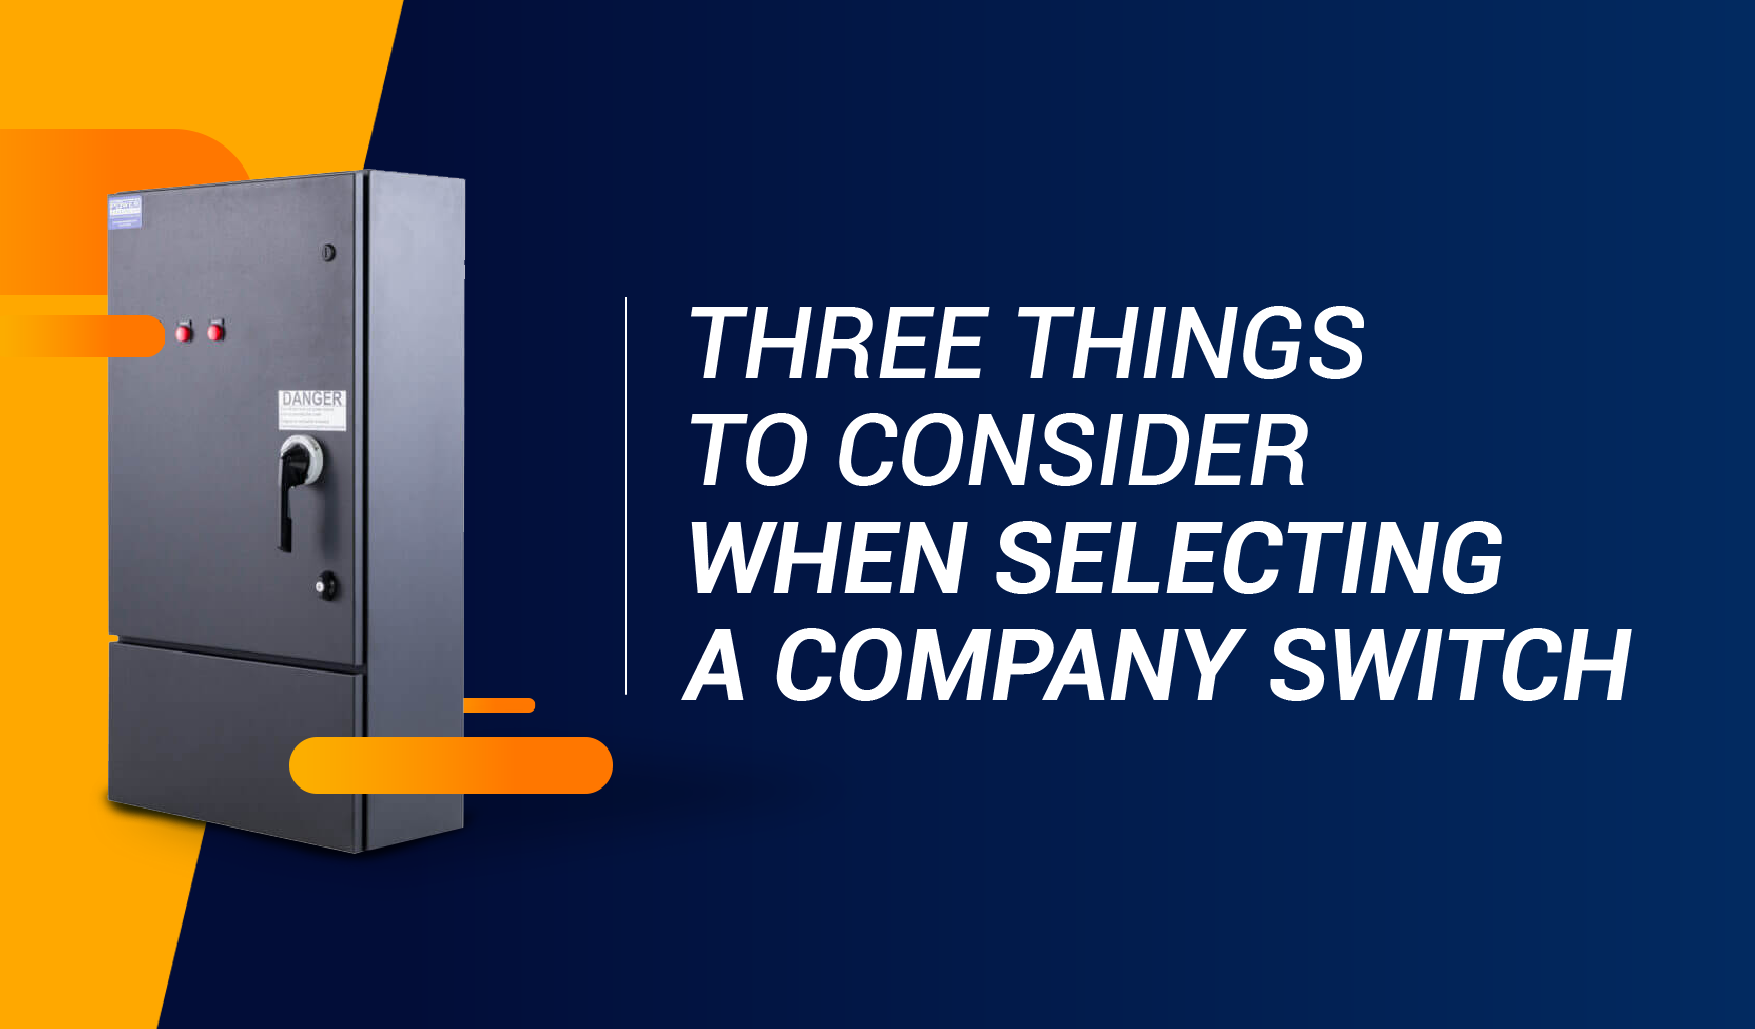 Three Things to Consider When Selecting a Company Switch